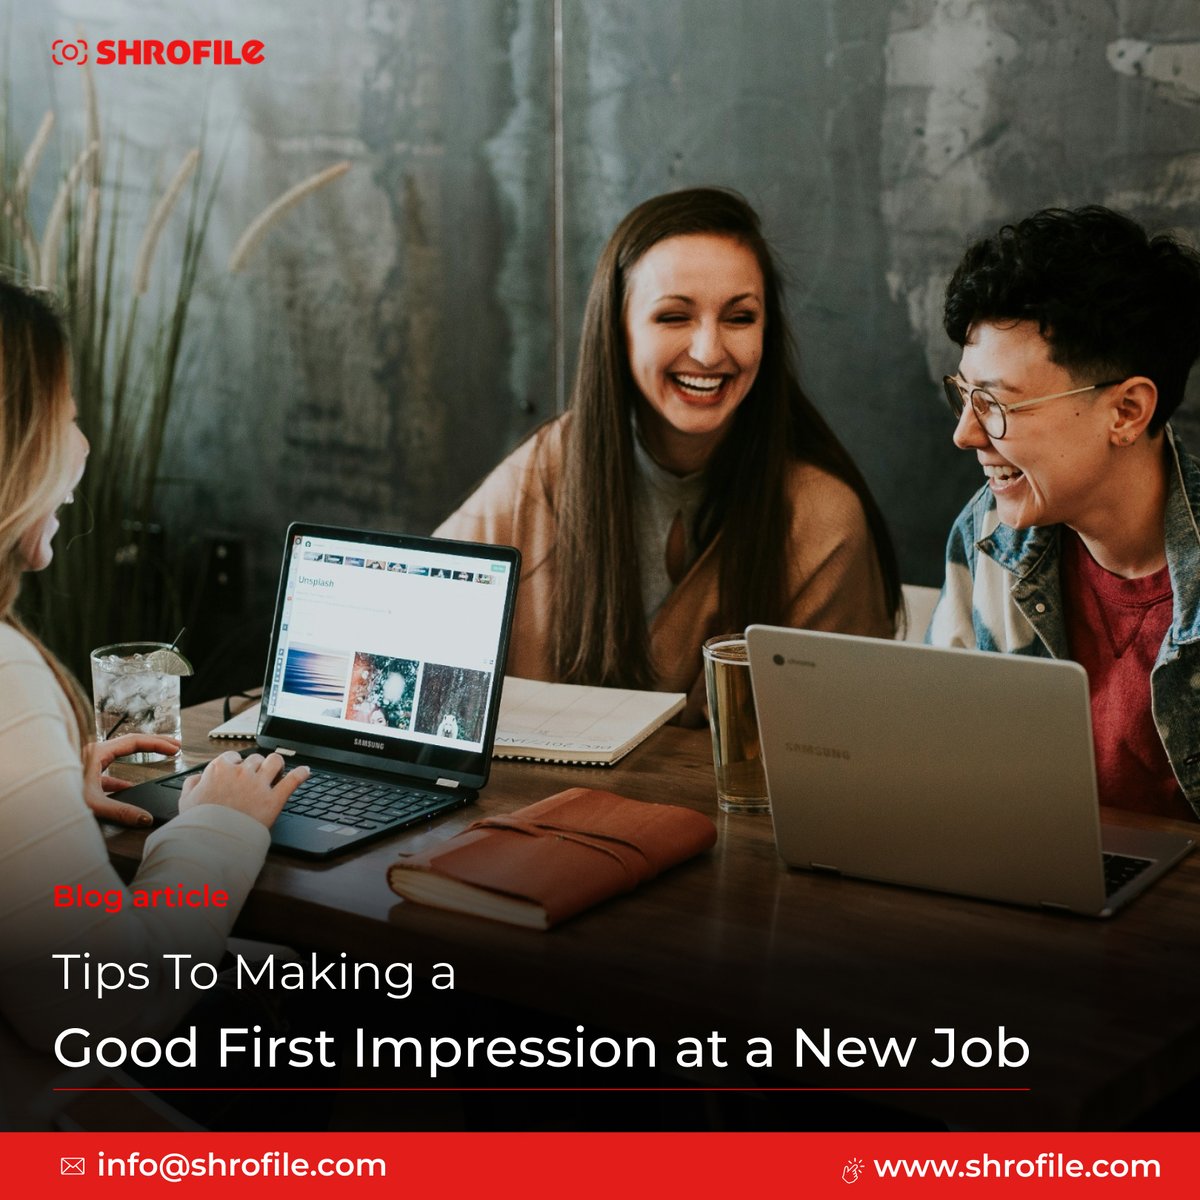 Tips To Making a Good First Impression at a New Job

Read more ~ shrofile.com/blog/tips-to-m…
Email - info@shrofile.com

#NewJobSuccess #FirstImpressionTips #PositiveStart #WorkRelationships #ProfessionalGrowth #CareerAdvice #JobSuccess #BuildingRapport #TeamworkWins #StartingStrong